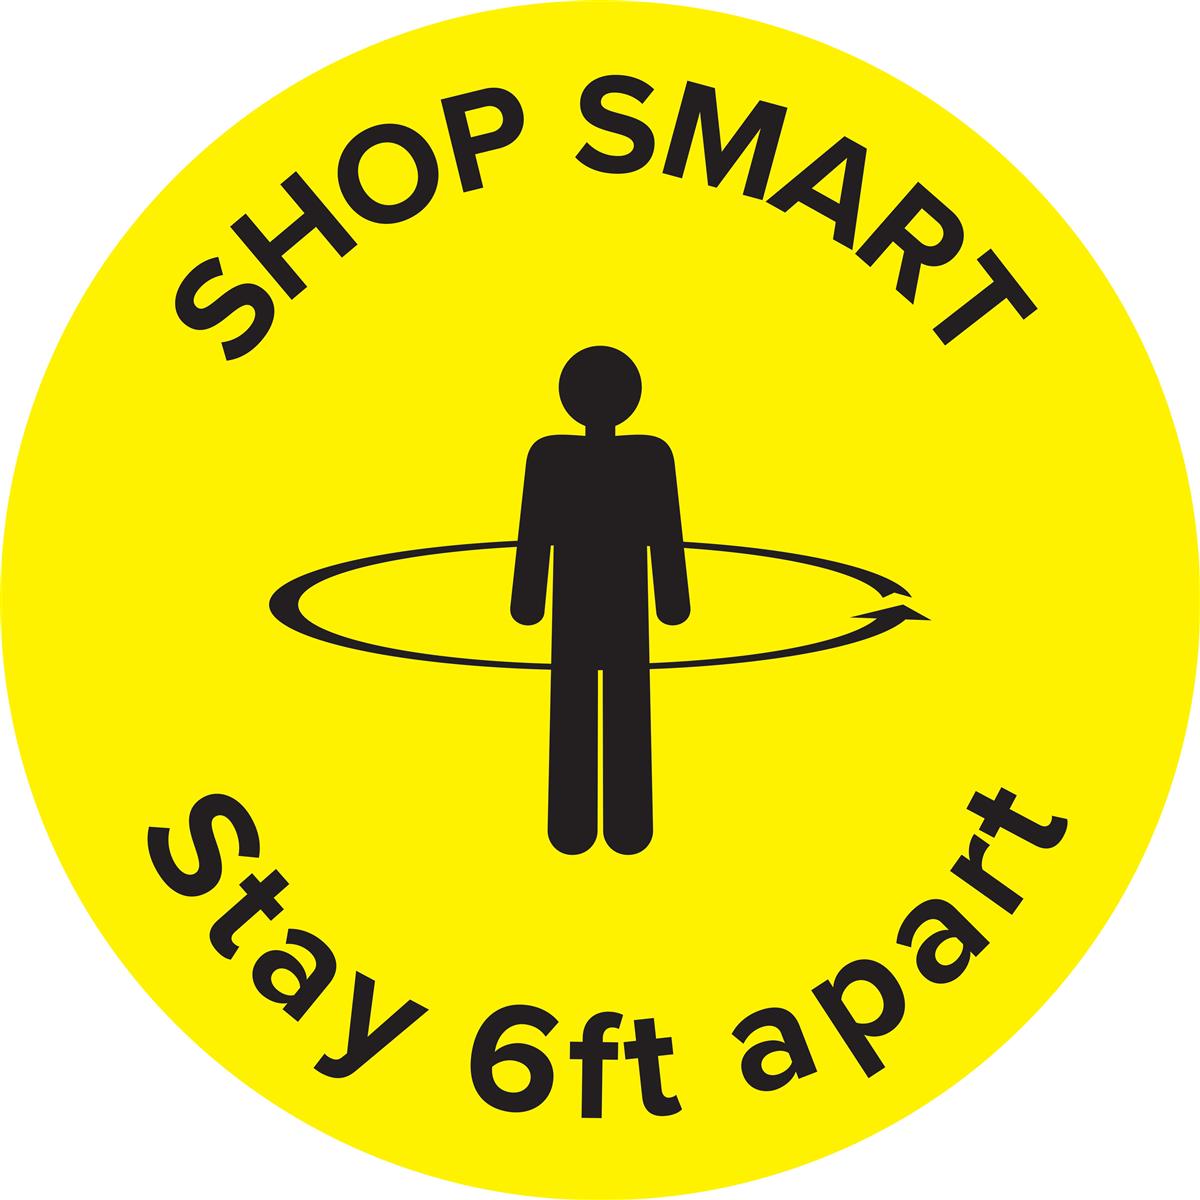 Bright yellow physical distancing "shop smart" floor decal